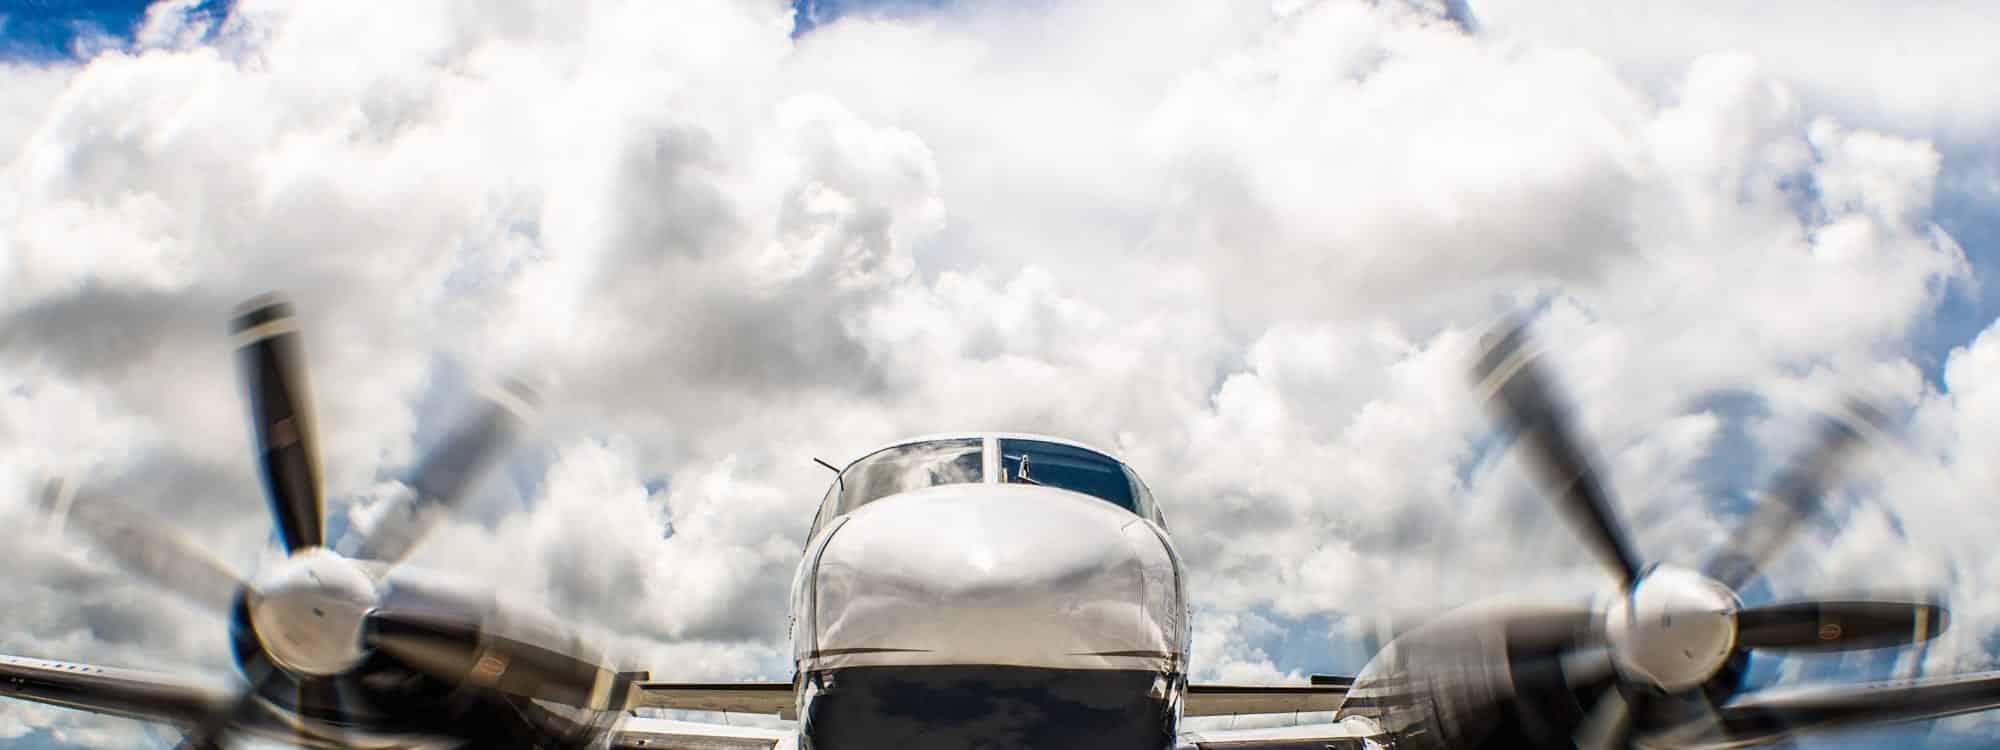 Taking off in a twin prop aircraft, A pilot benefits from refreshing his aviation legislation knowledge in Southpac’s Aviation Legislation Refresher course.